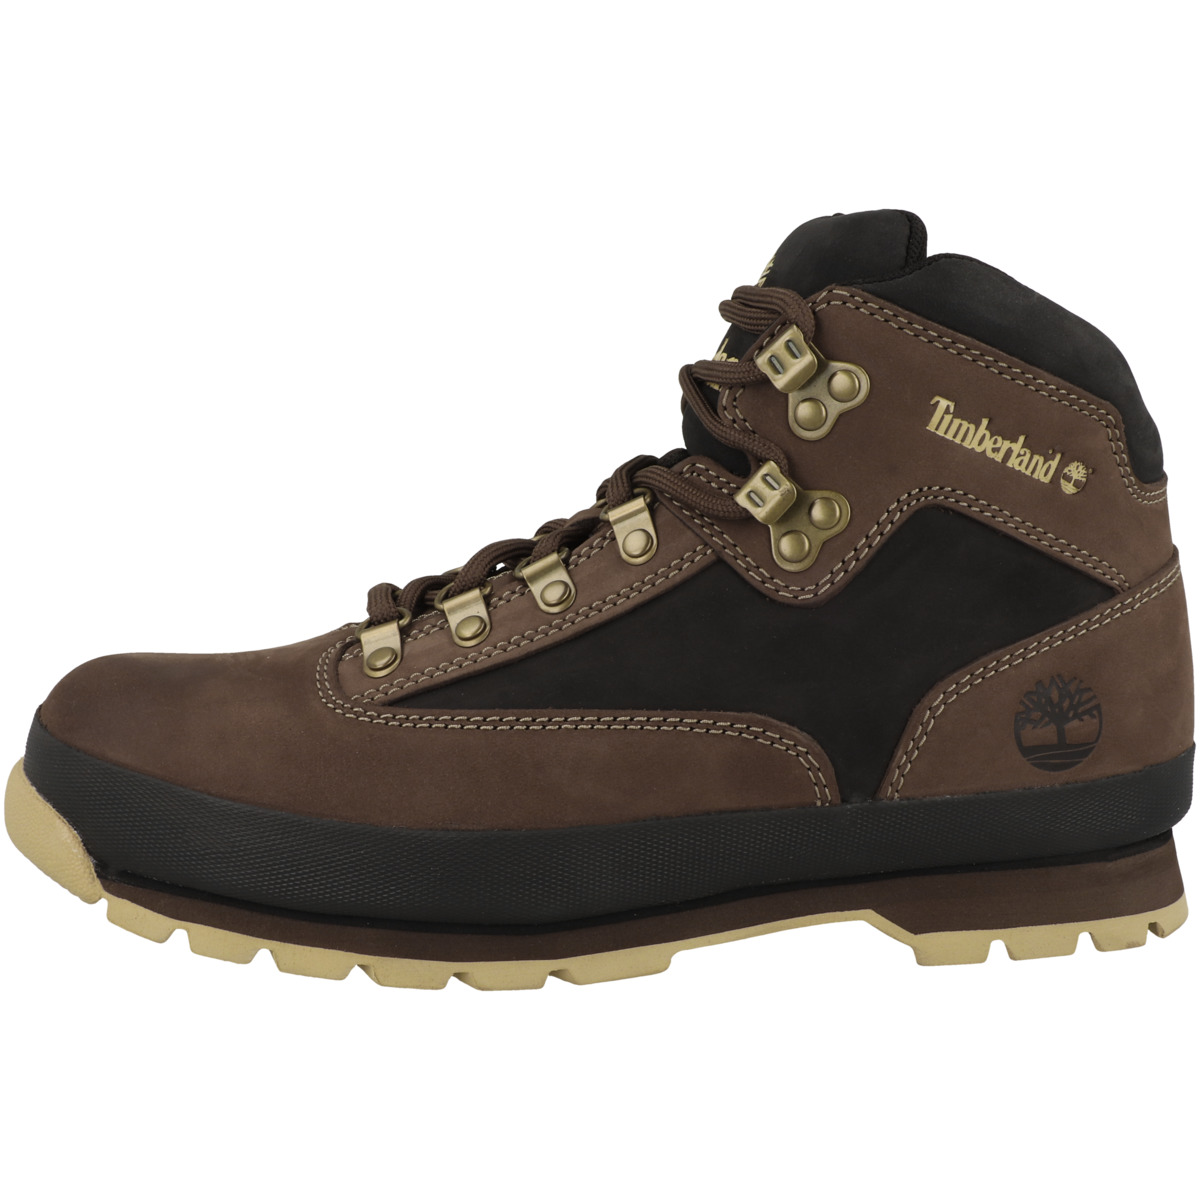 Timberland Euro Hiker Leather Schnürboots